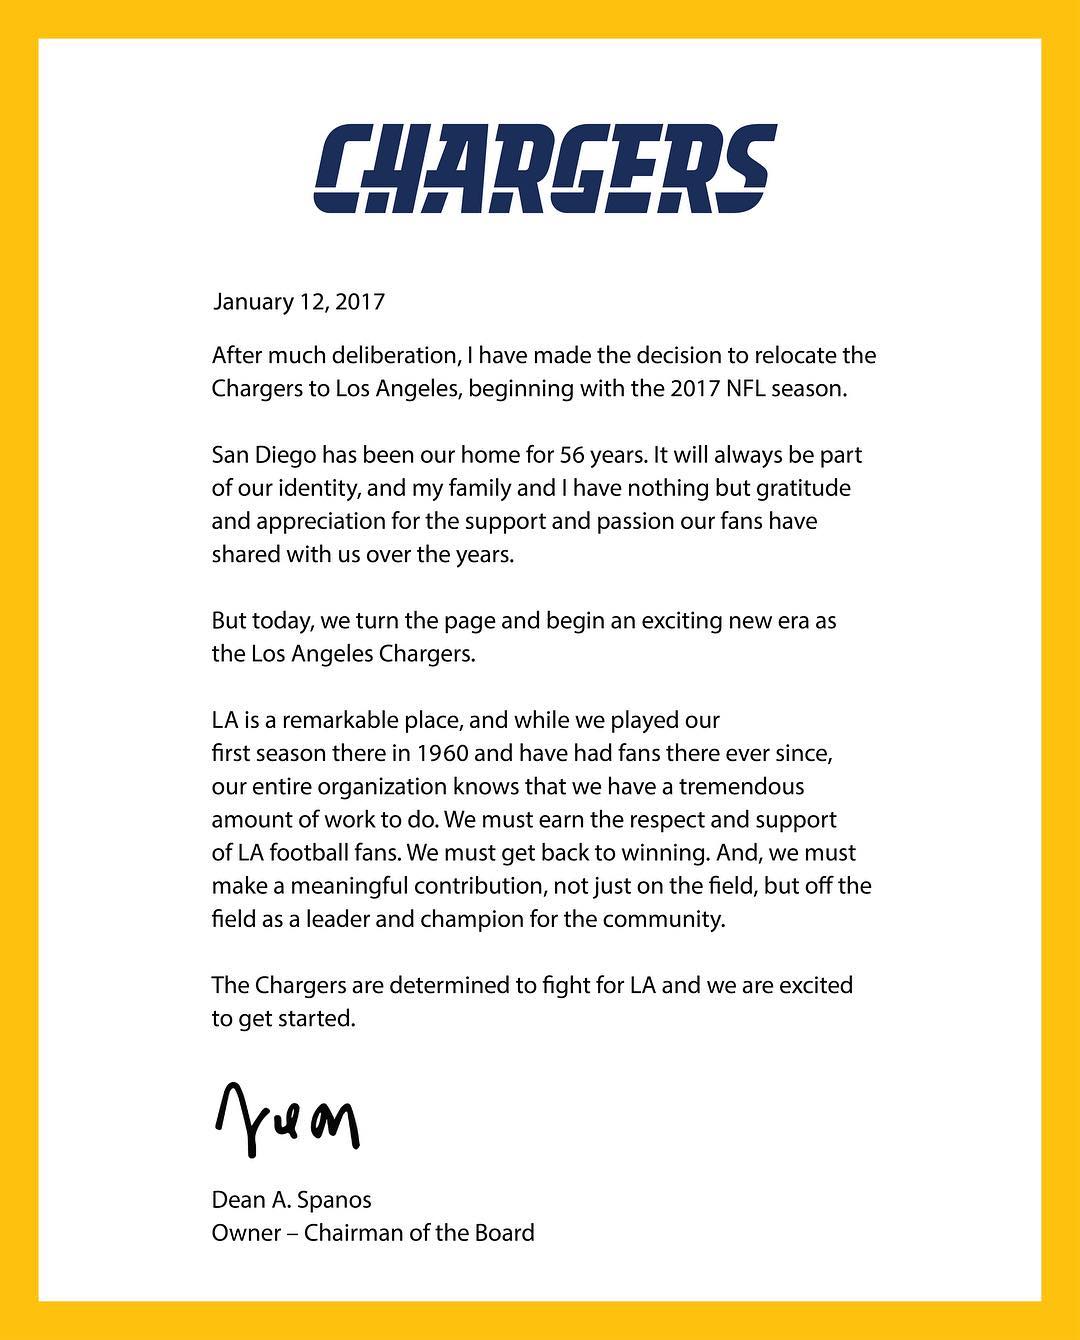 A letter from Dean Spanos